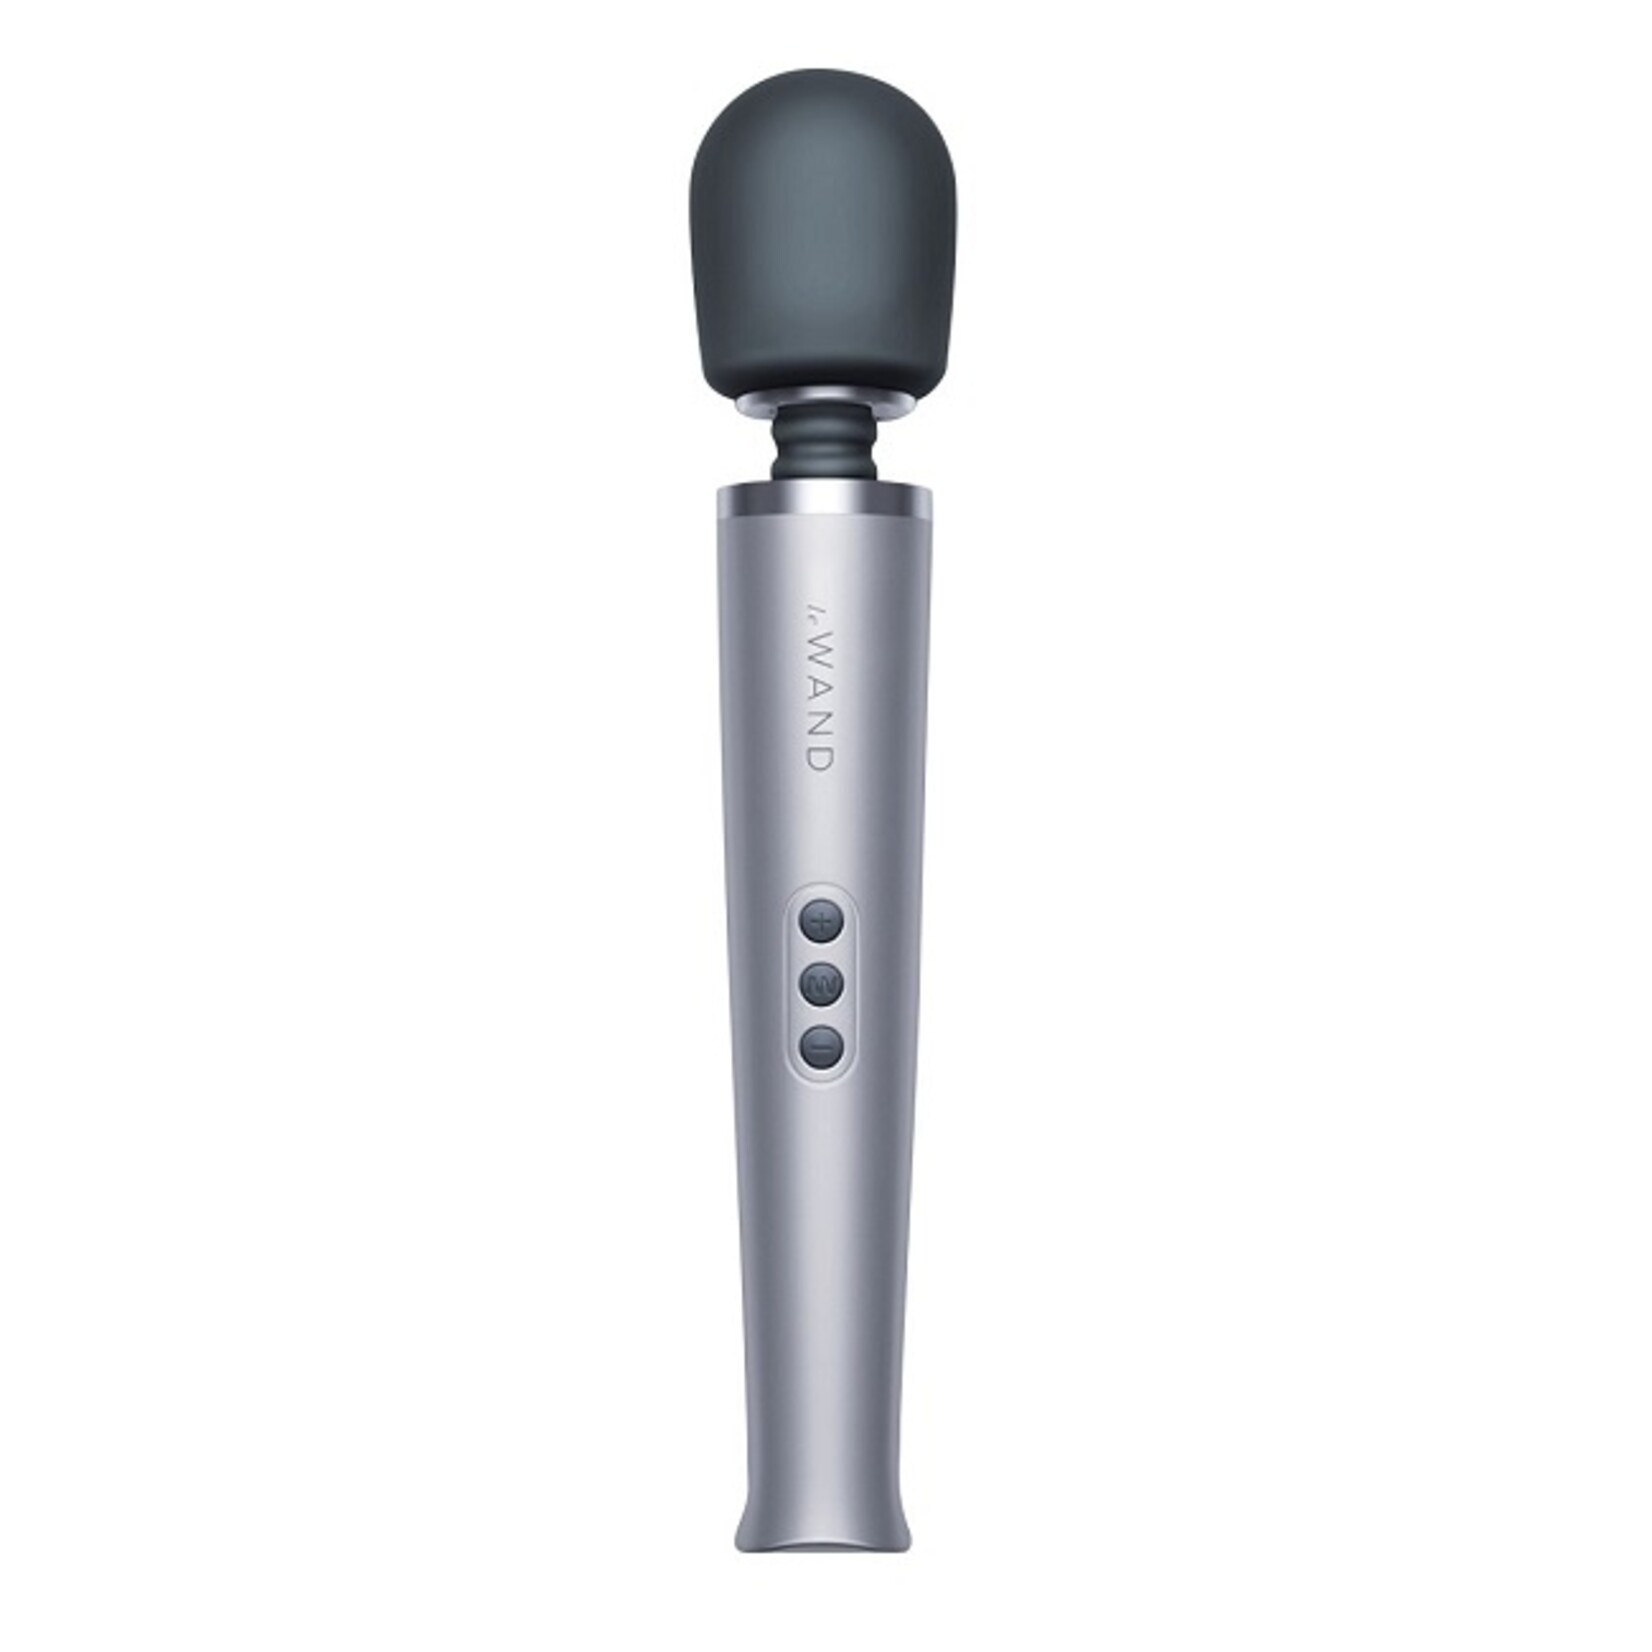 Le Wand Le Wand Rechargeable Vibrating Massager